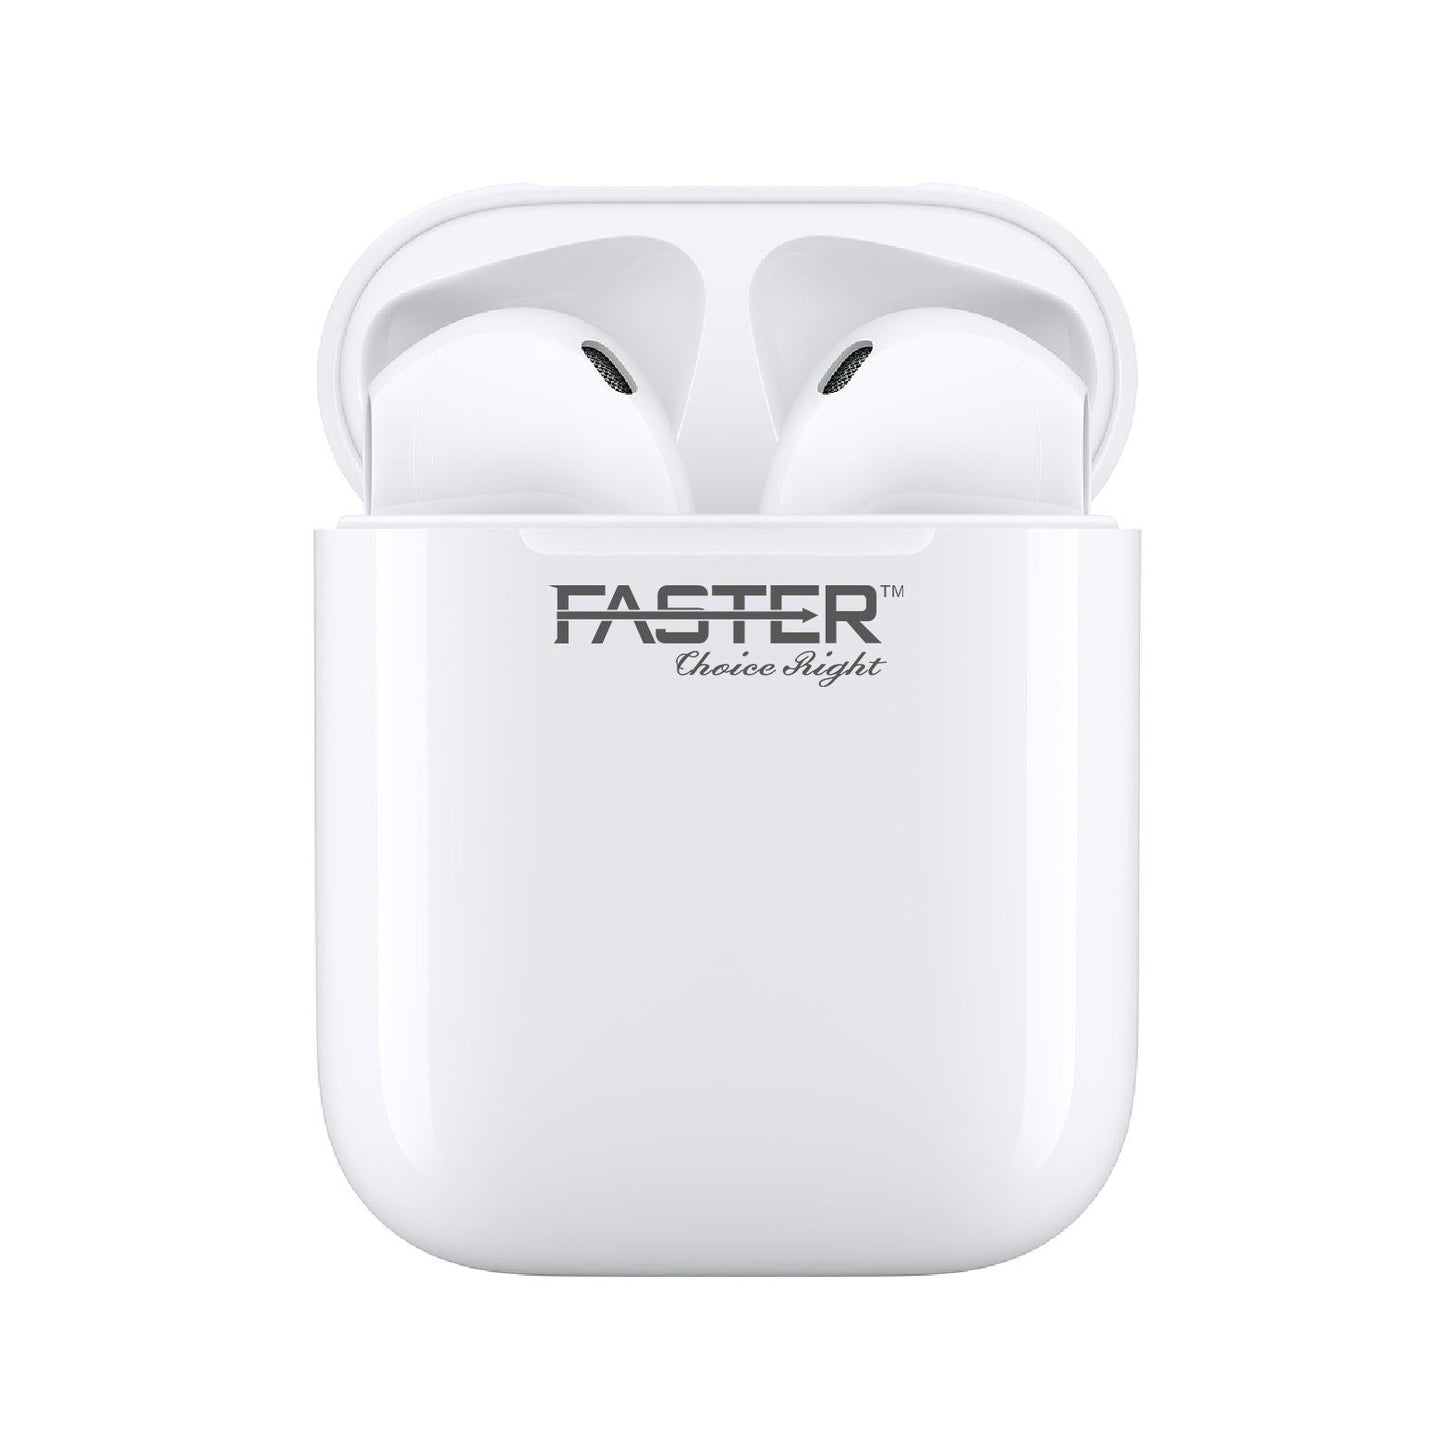 Faster FTW-12 Pro TWS Bluetooth Earbuds